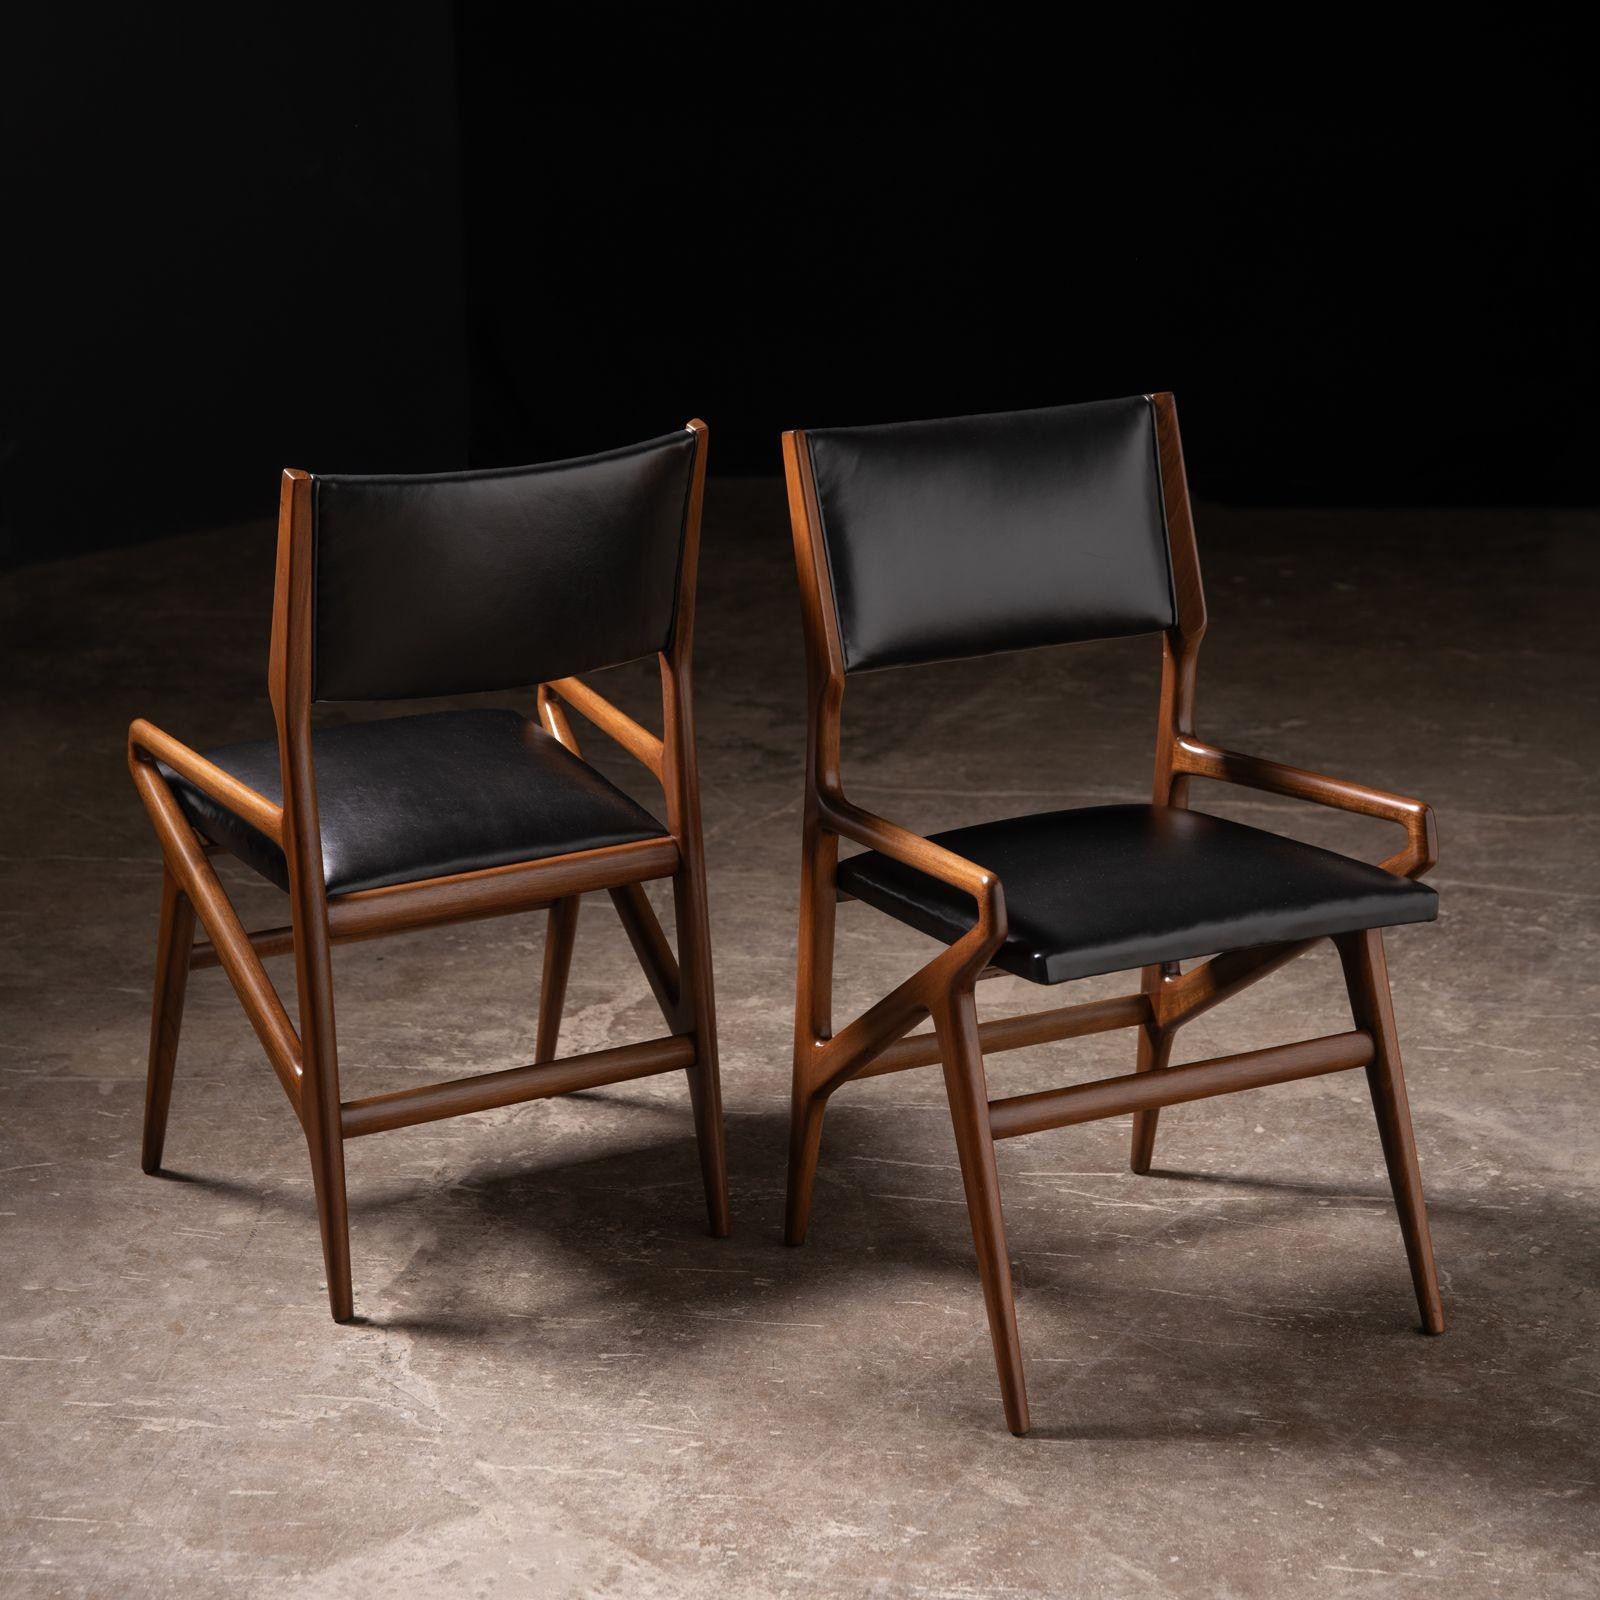 Sert of four dining chairs model 211 designed by Gio Ponti, 1955 for Singer & Sons. The model 211 chair was originally designed for Villa Arreaza in Caracas in 1954. Chairs are constructed of walnut & leather and have been professionally restored.